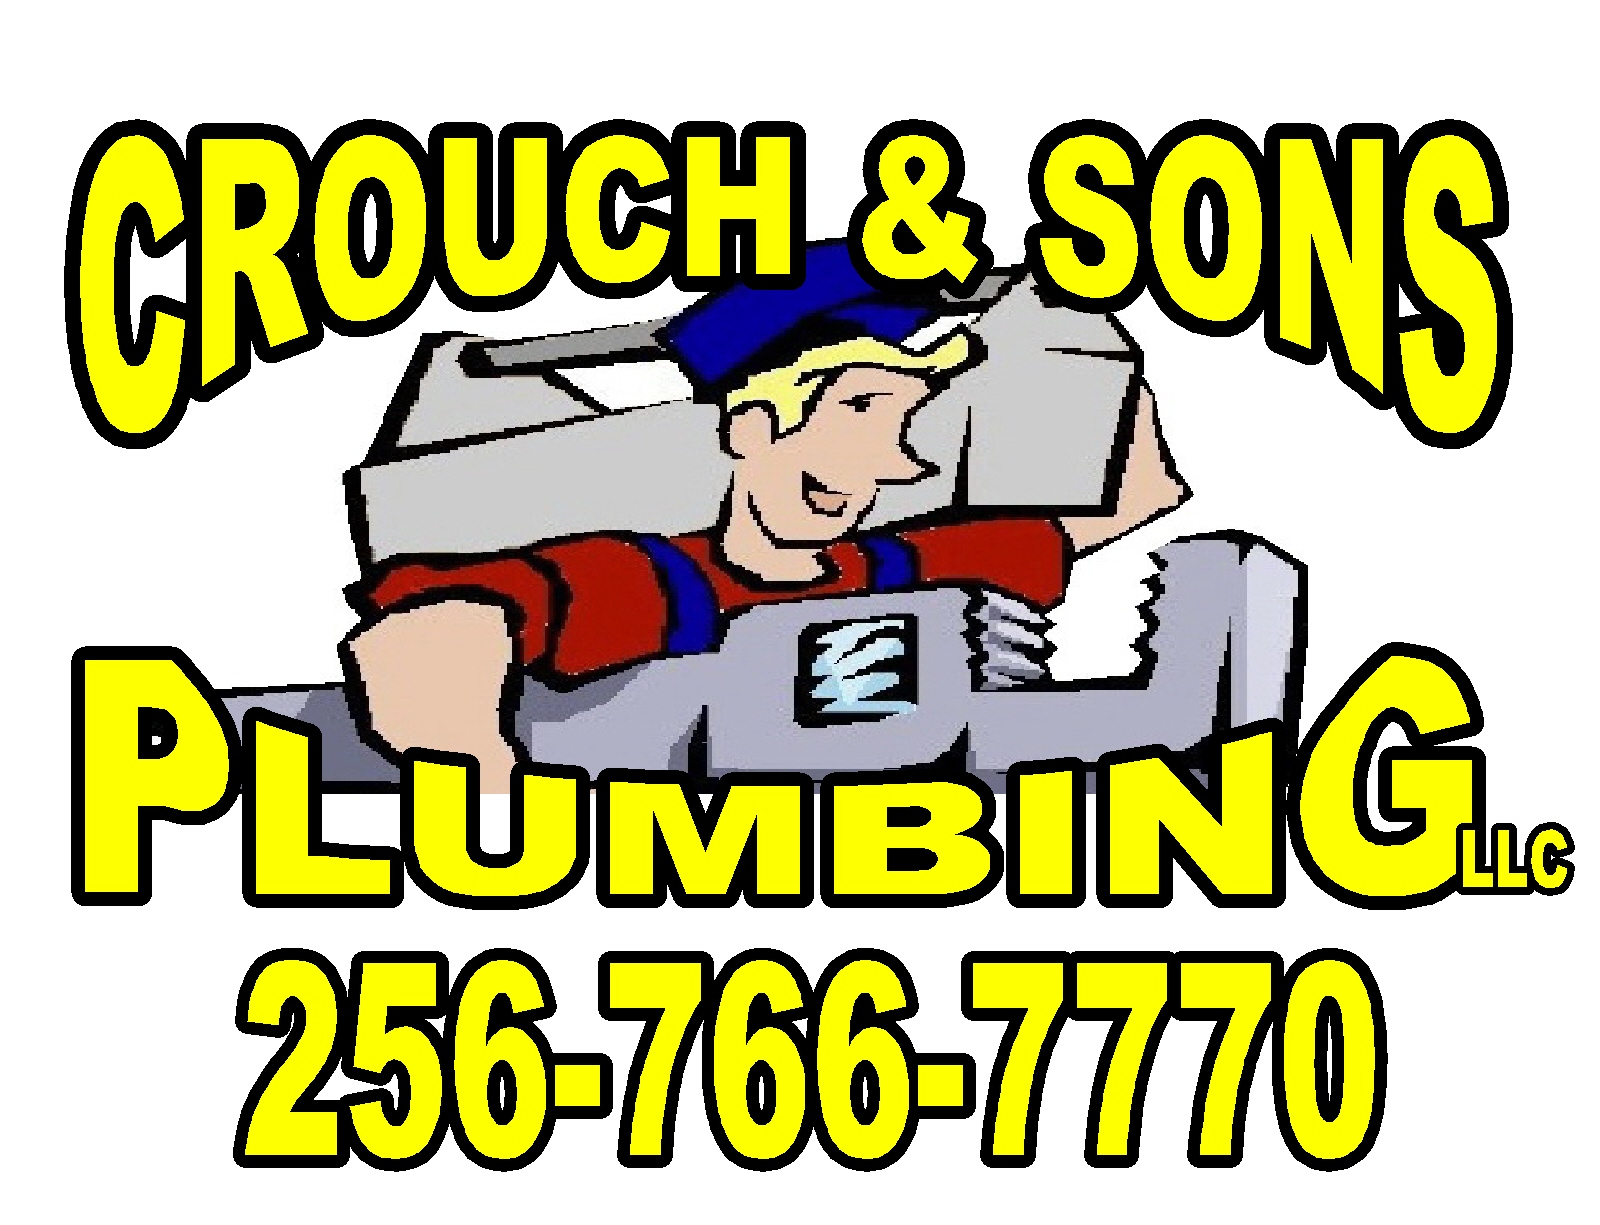 Crouch & Sons